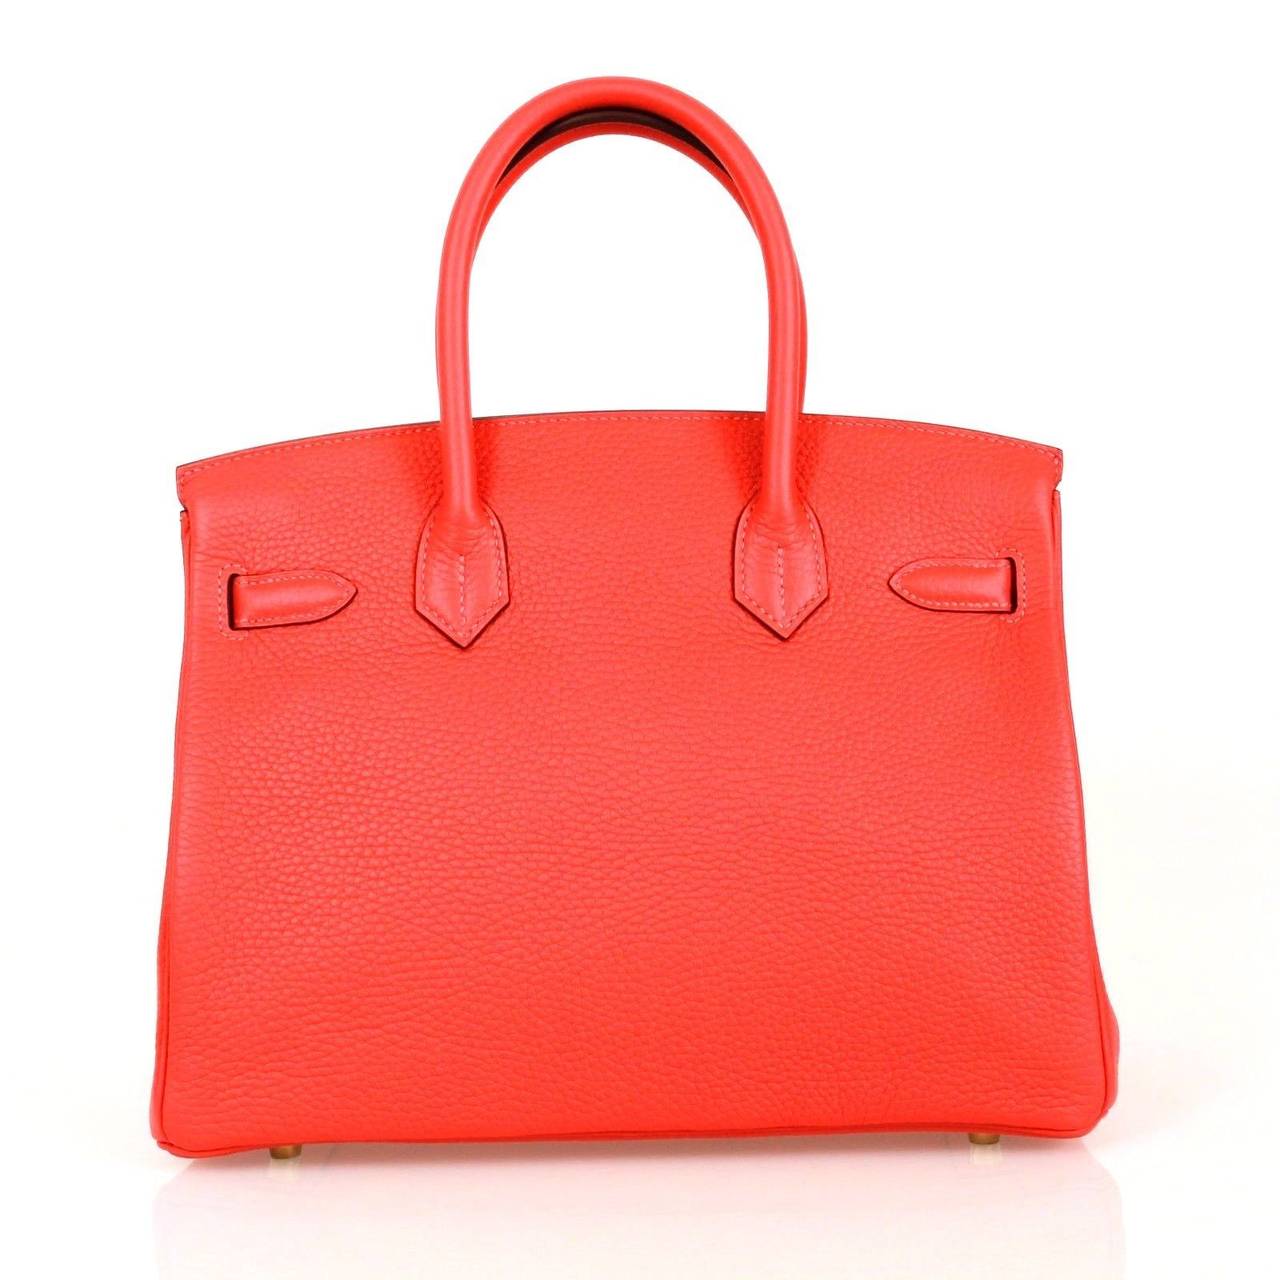 Hermes Rouge Pivione Clemence Leather Gold HDW 2015 30 cm Birkin Tote Bag In New Condition For Sale In Miami, FL